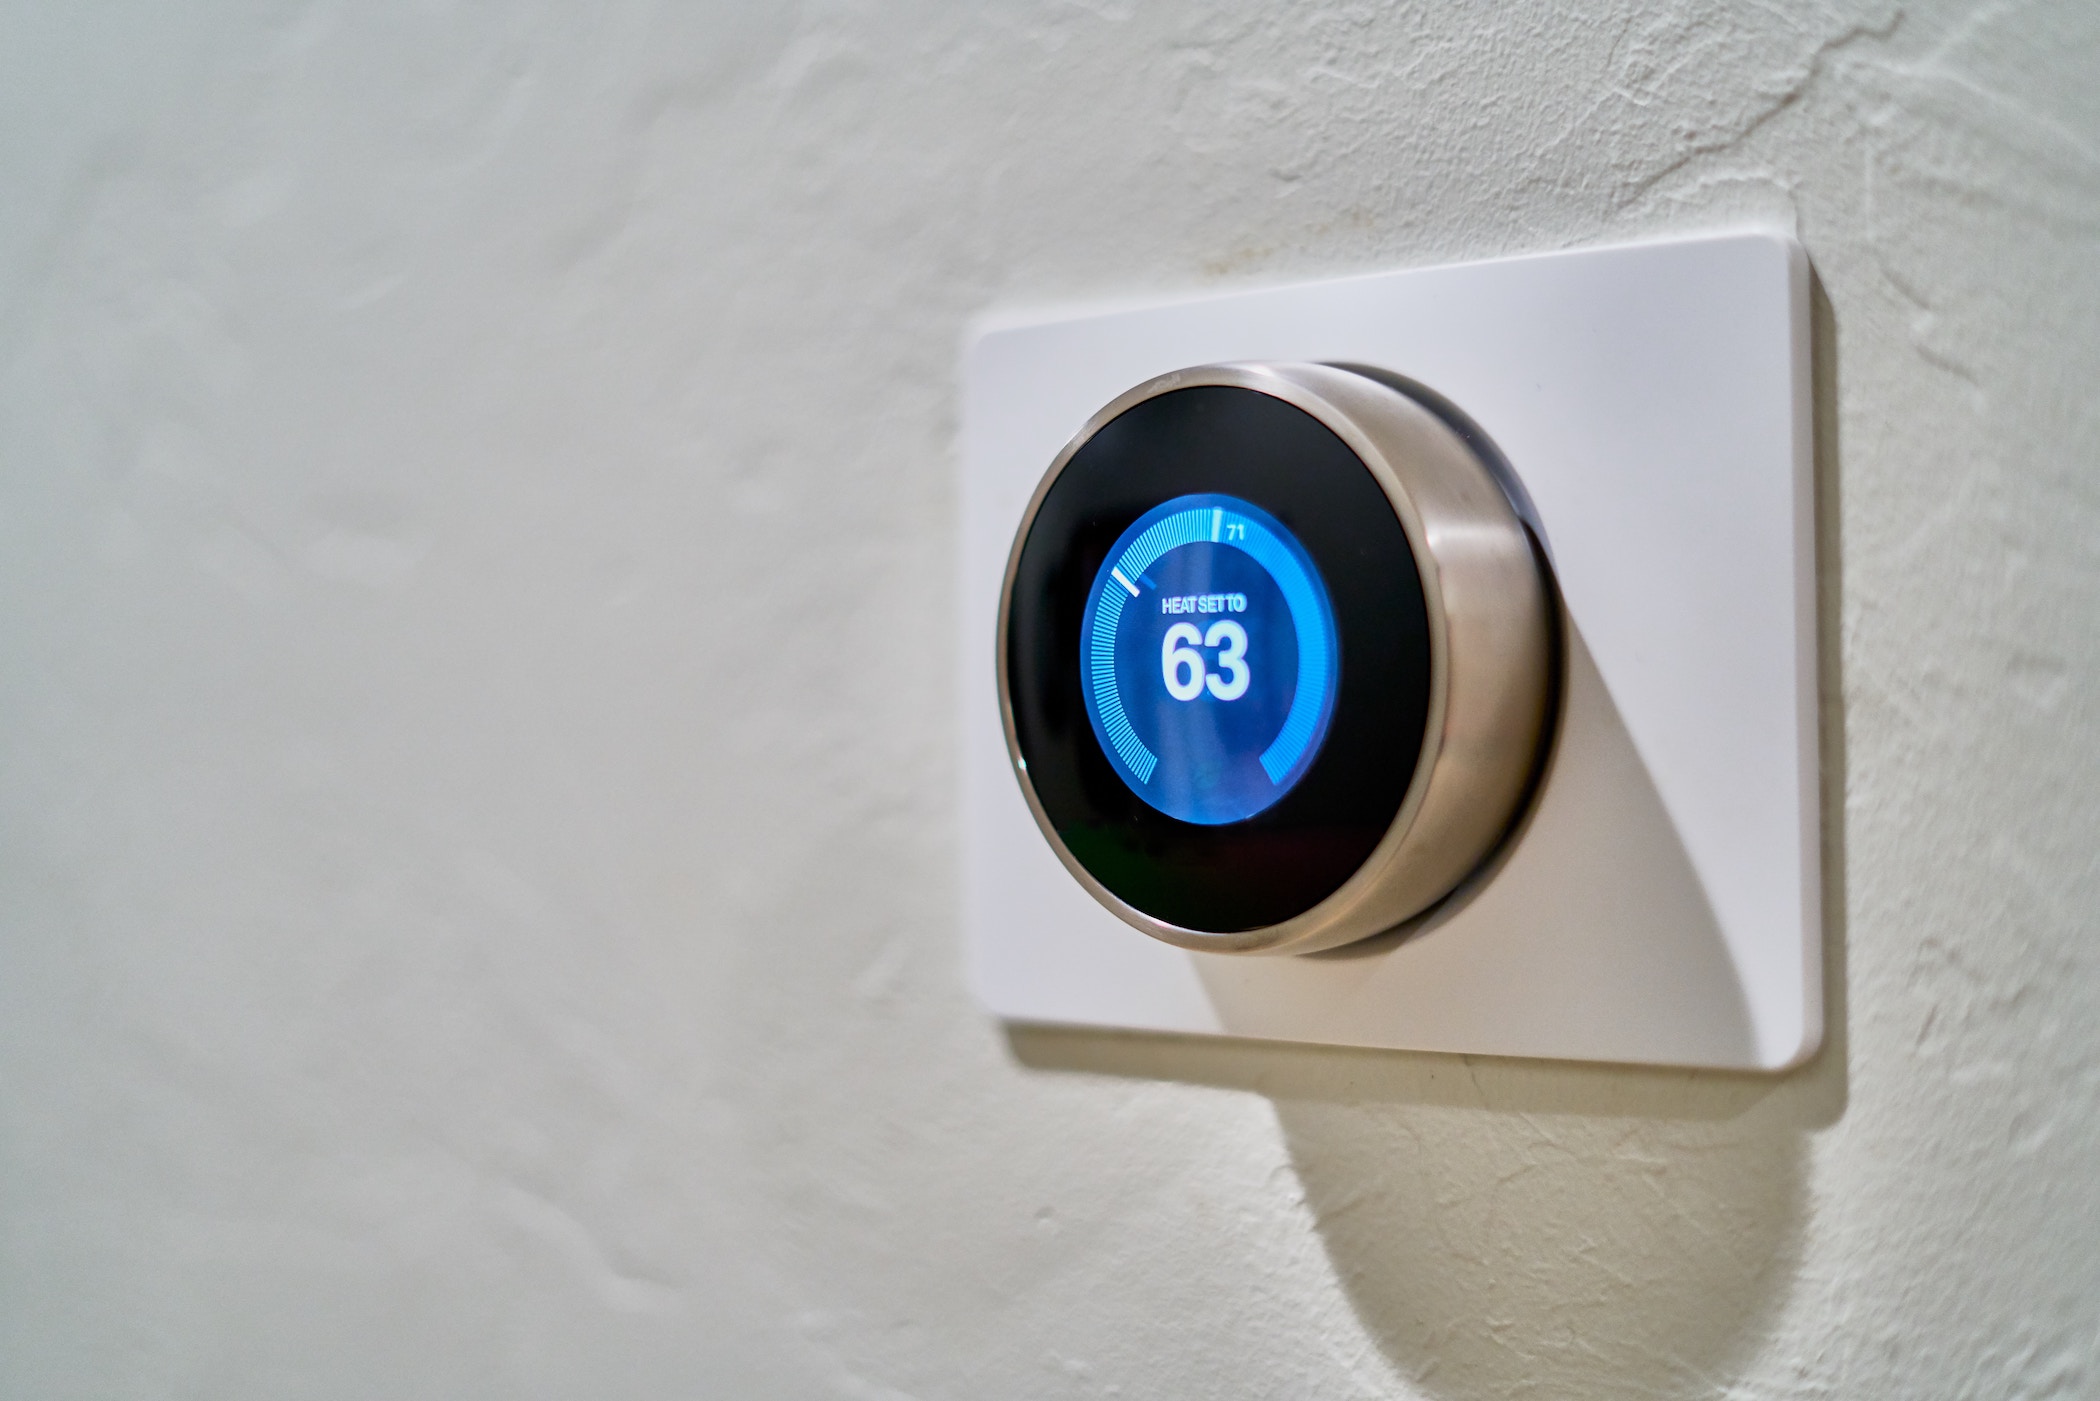 Smart home technology is becoming more and more popular, but not everyone wants these products in their homes. However, some residents don't have a choice. 